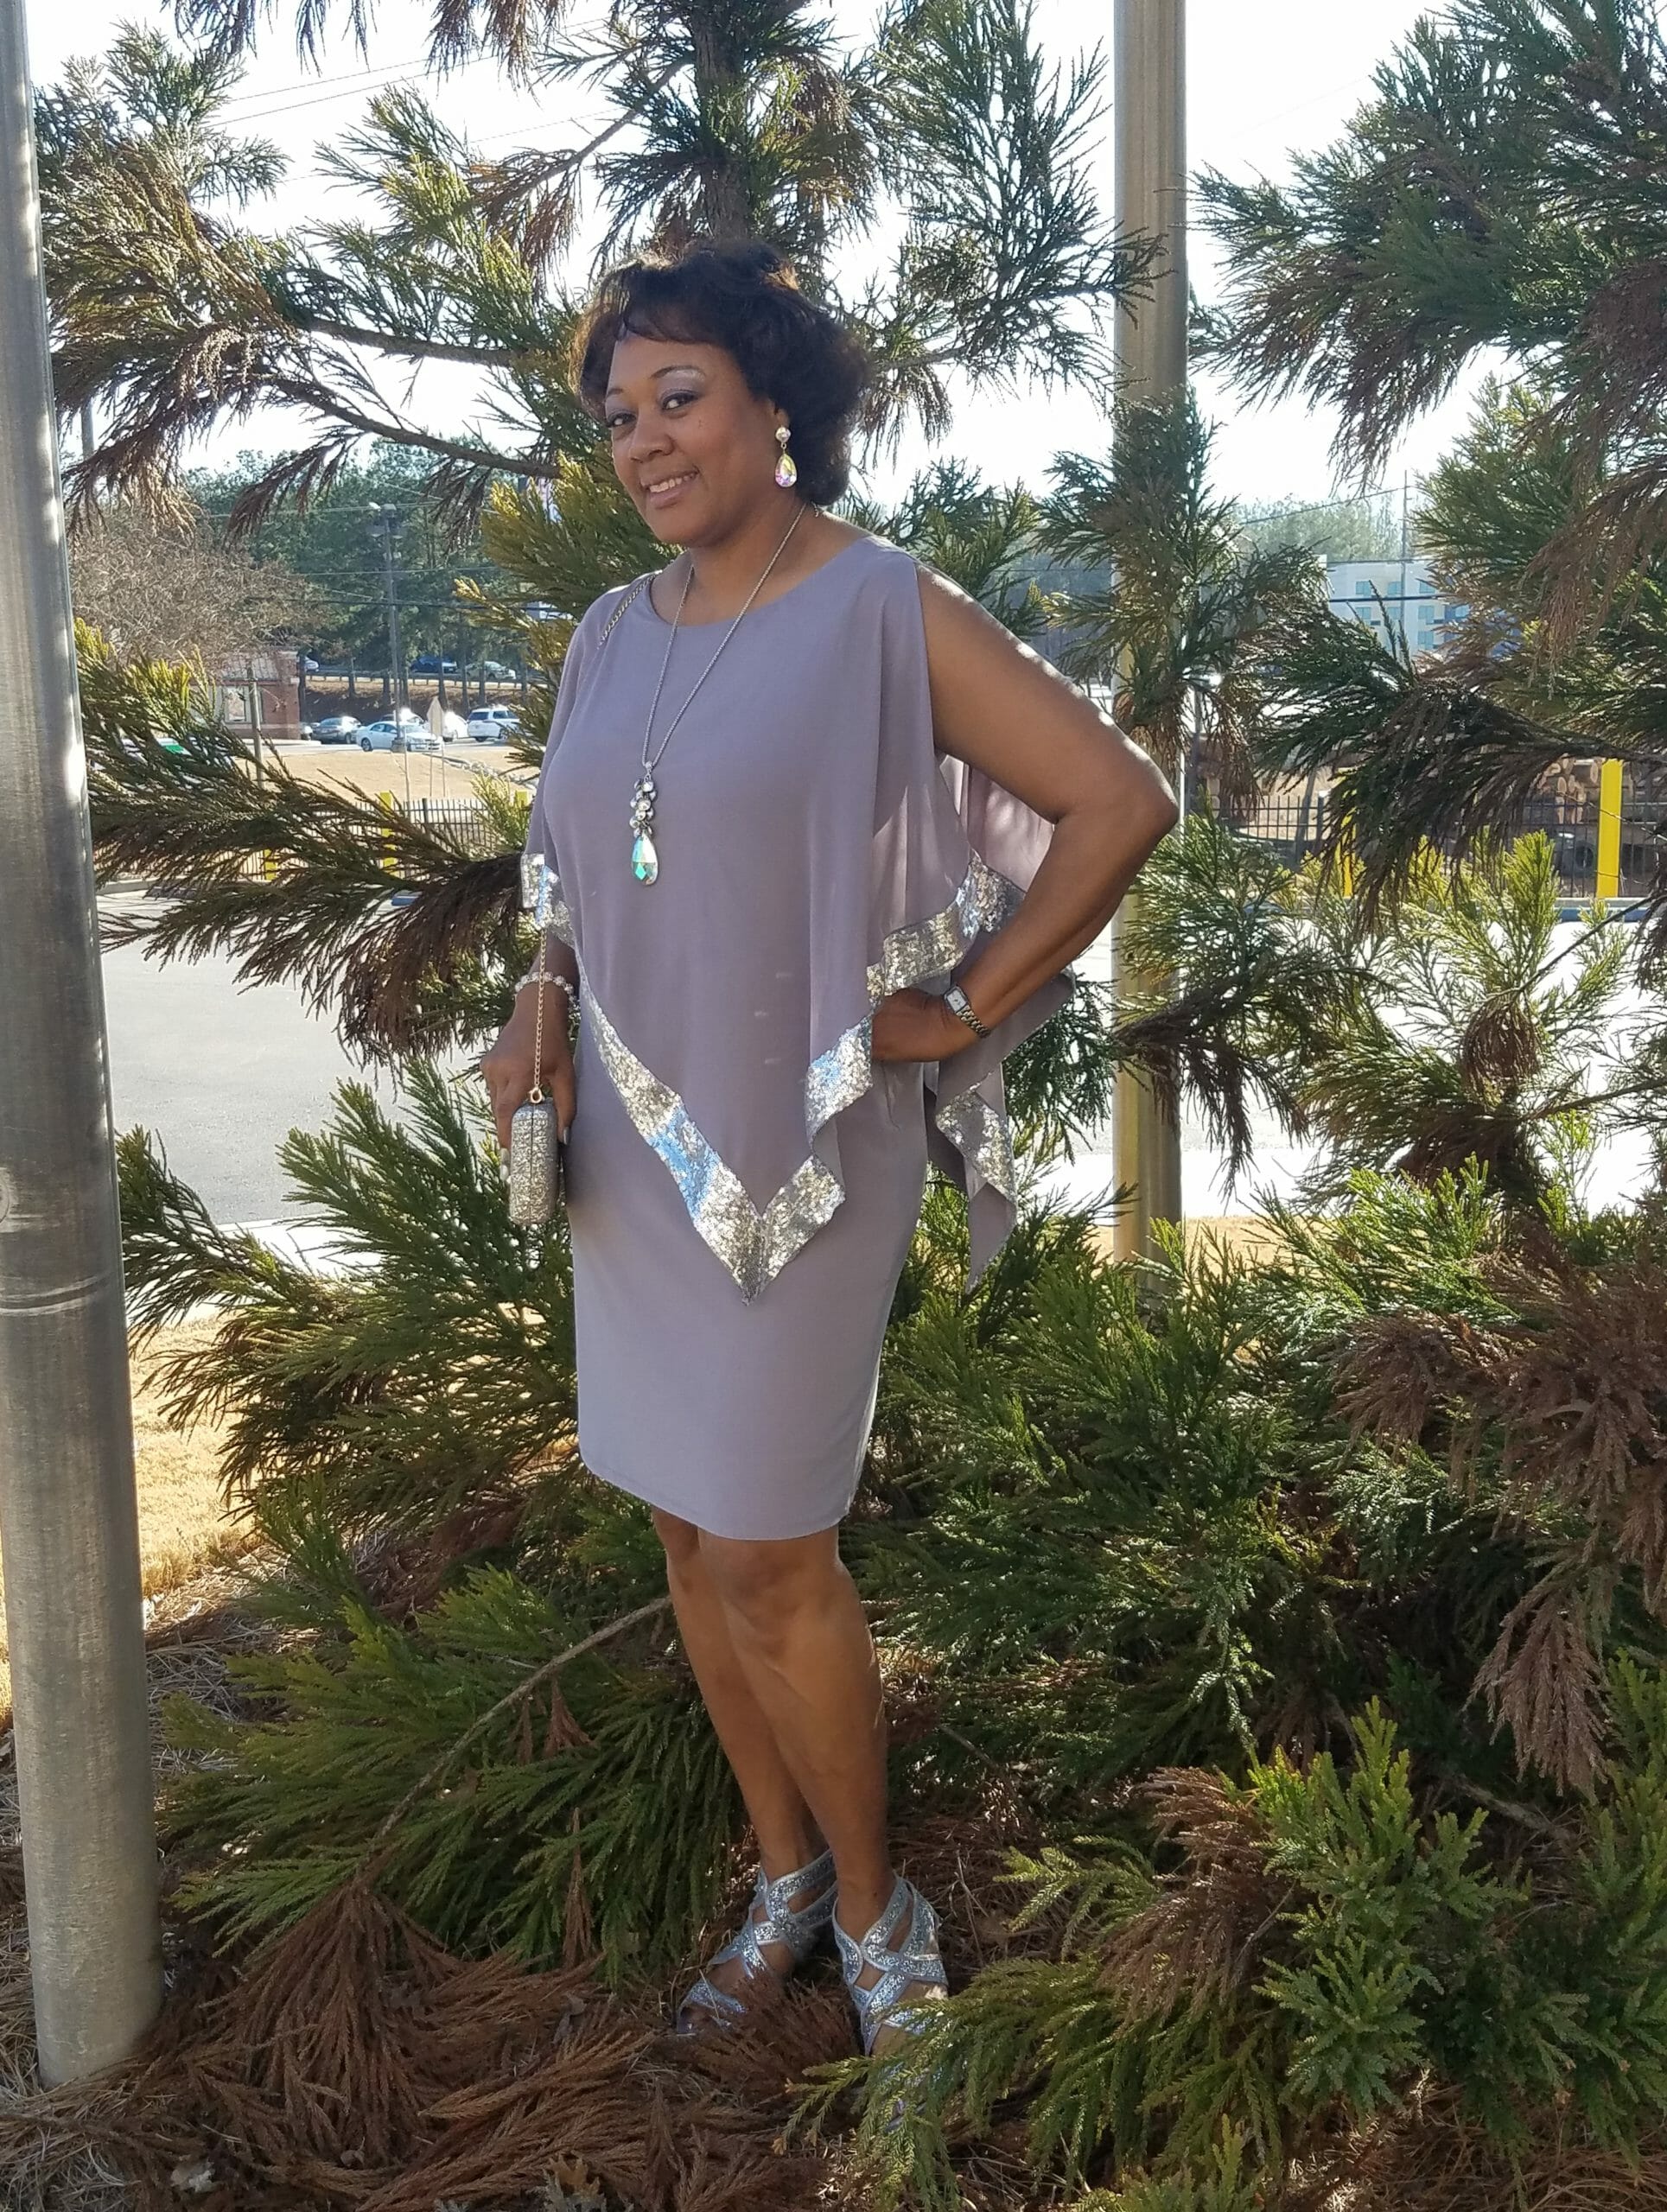 A smiling Midnight Velvet customer by pines, in a lavender dress with silver trim on the cape-like top, and silver sandals.